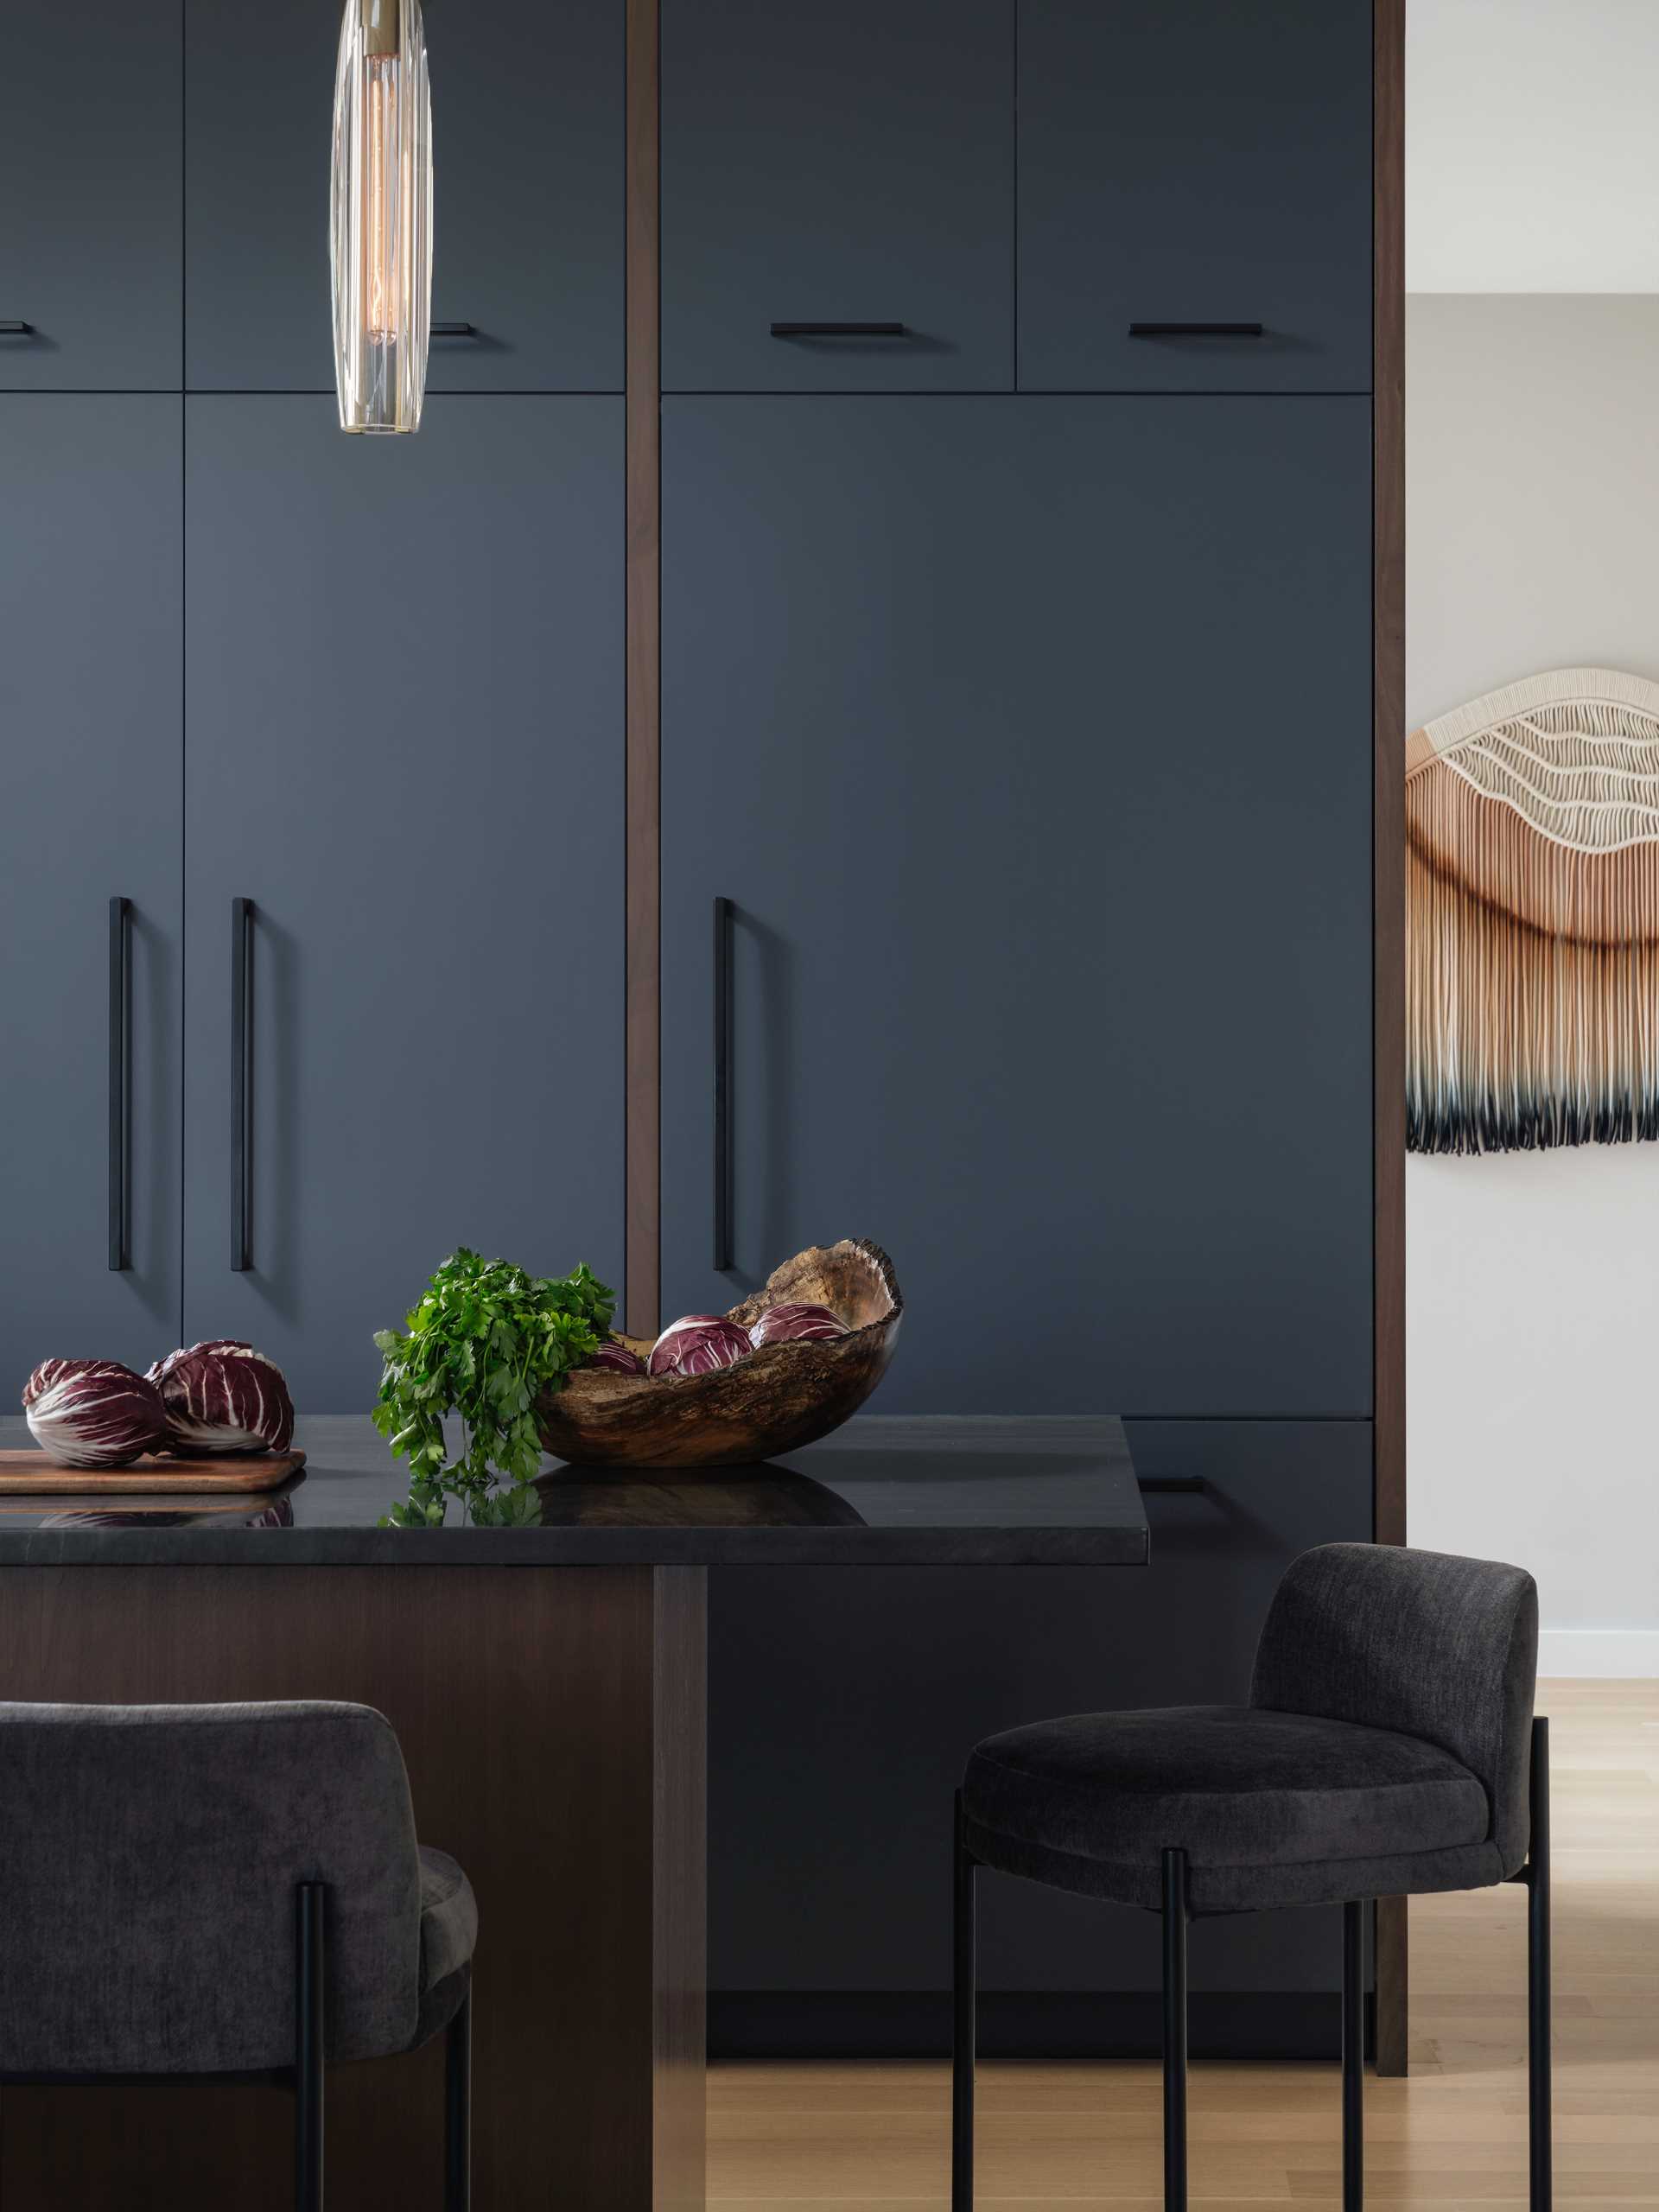 In this modern kitchen, deep walnut tones and a Diamante Nero quartzite create a bold appearance.